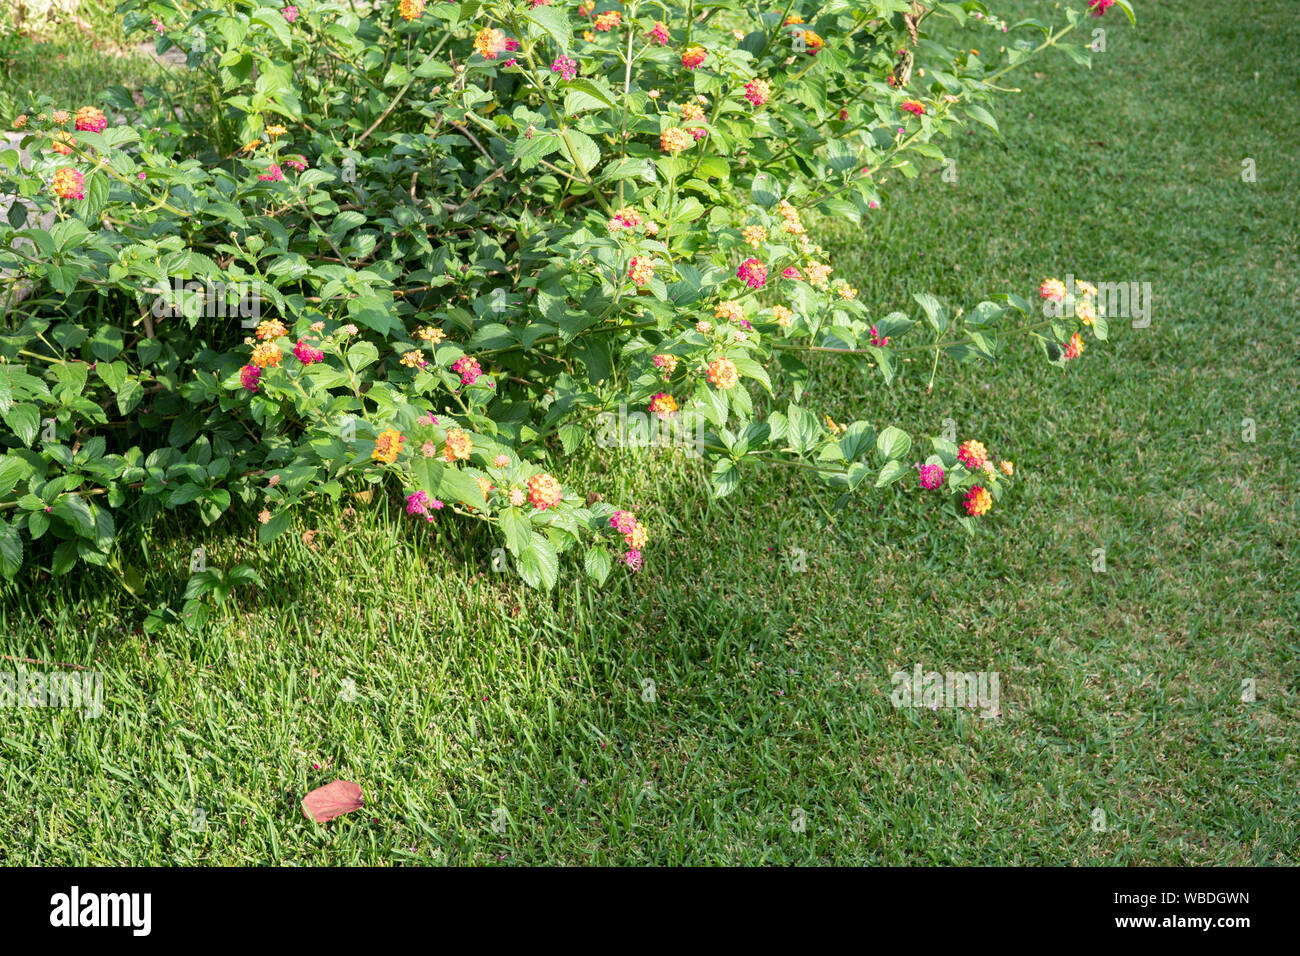 Garden background. Fresh Mown Lawn with plants and flowers. Copy space for text Stock Photo